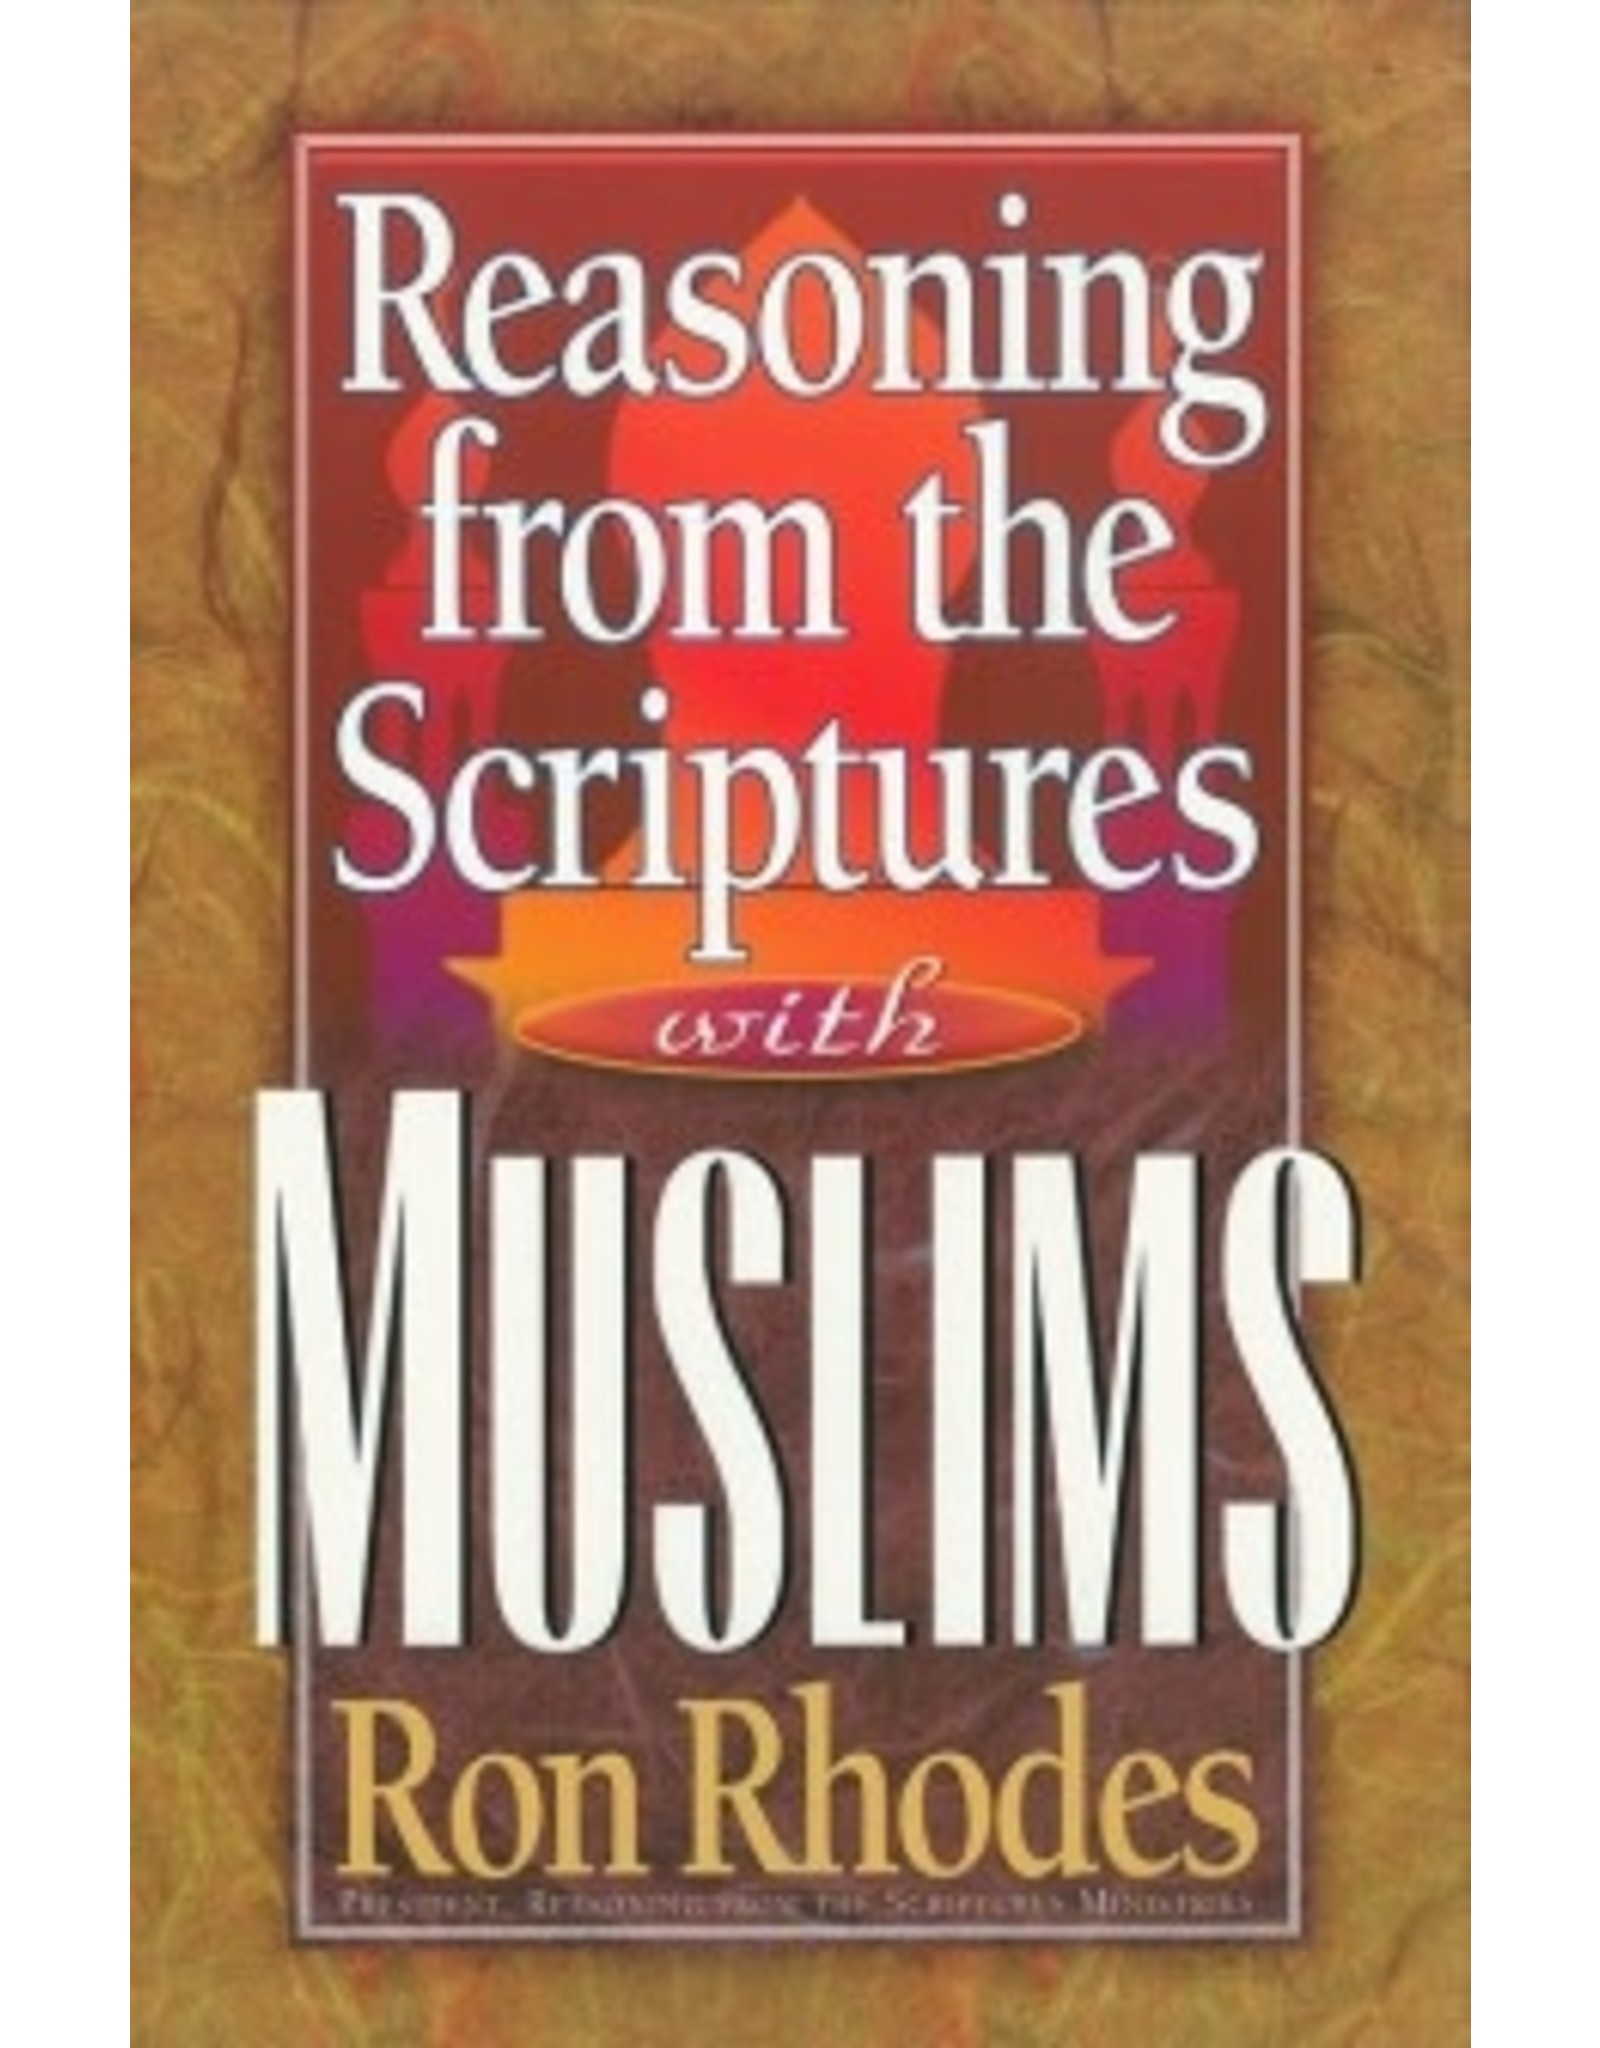 Ron Rhodes Reasoning from the Scriptures With Muslims